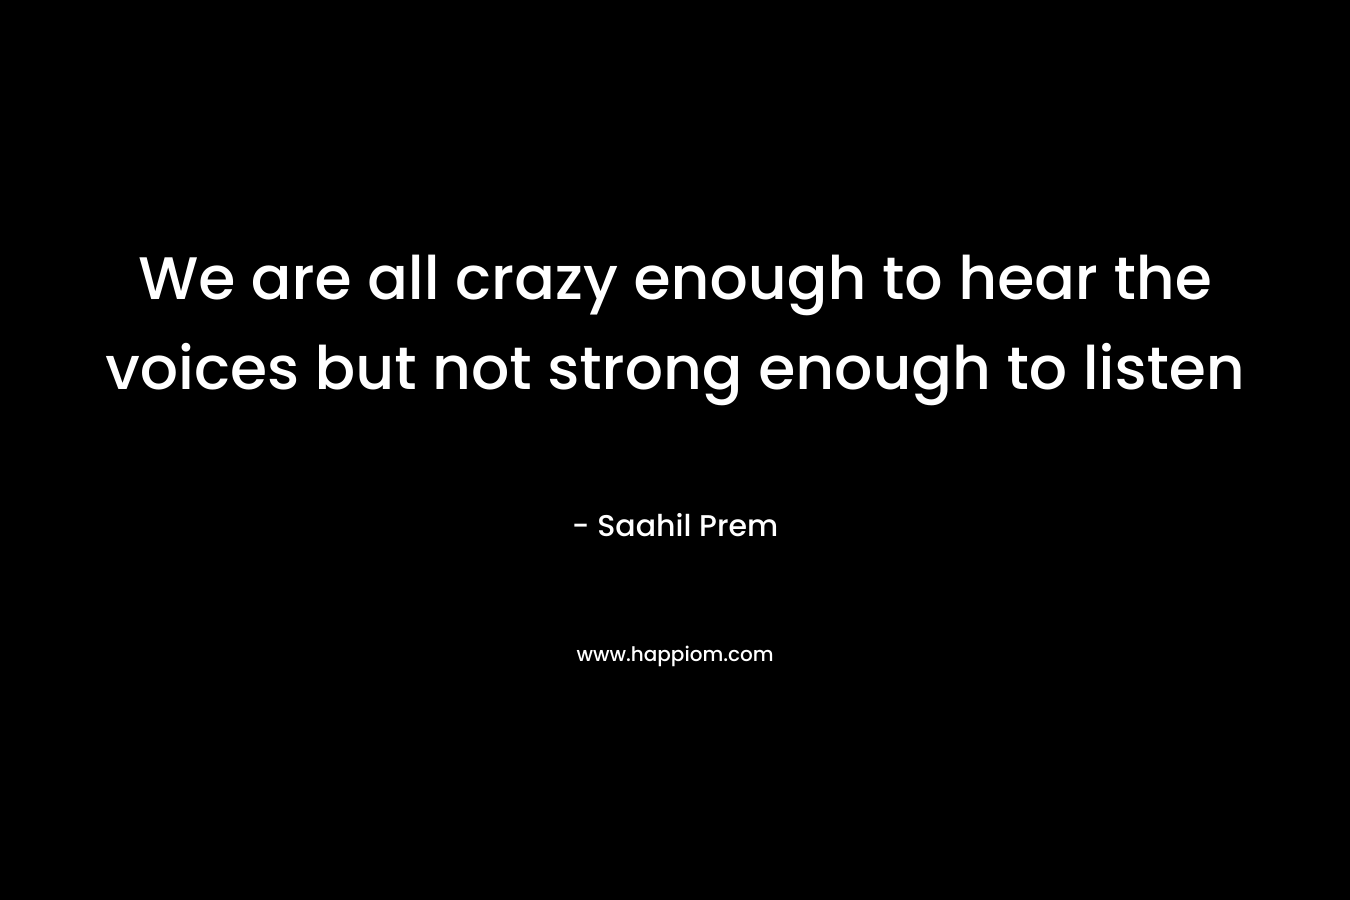 We are all crazy enough to hear the voices but not strong enough to listen